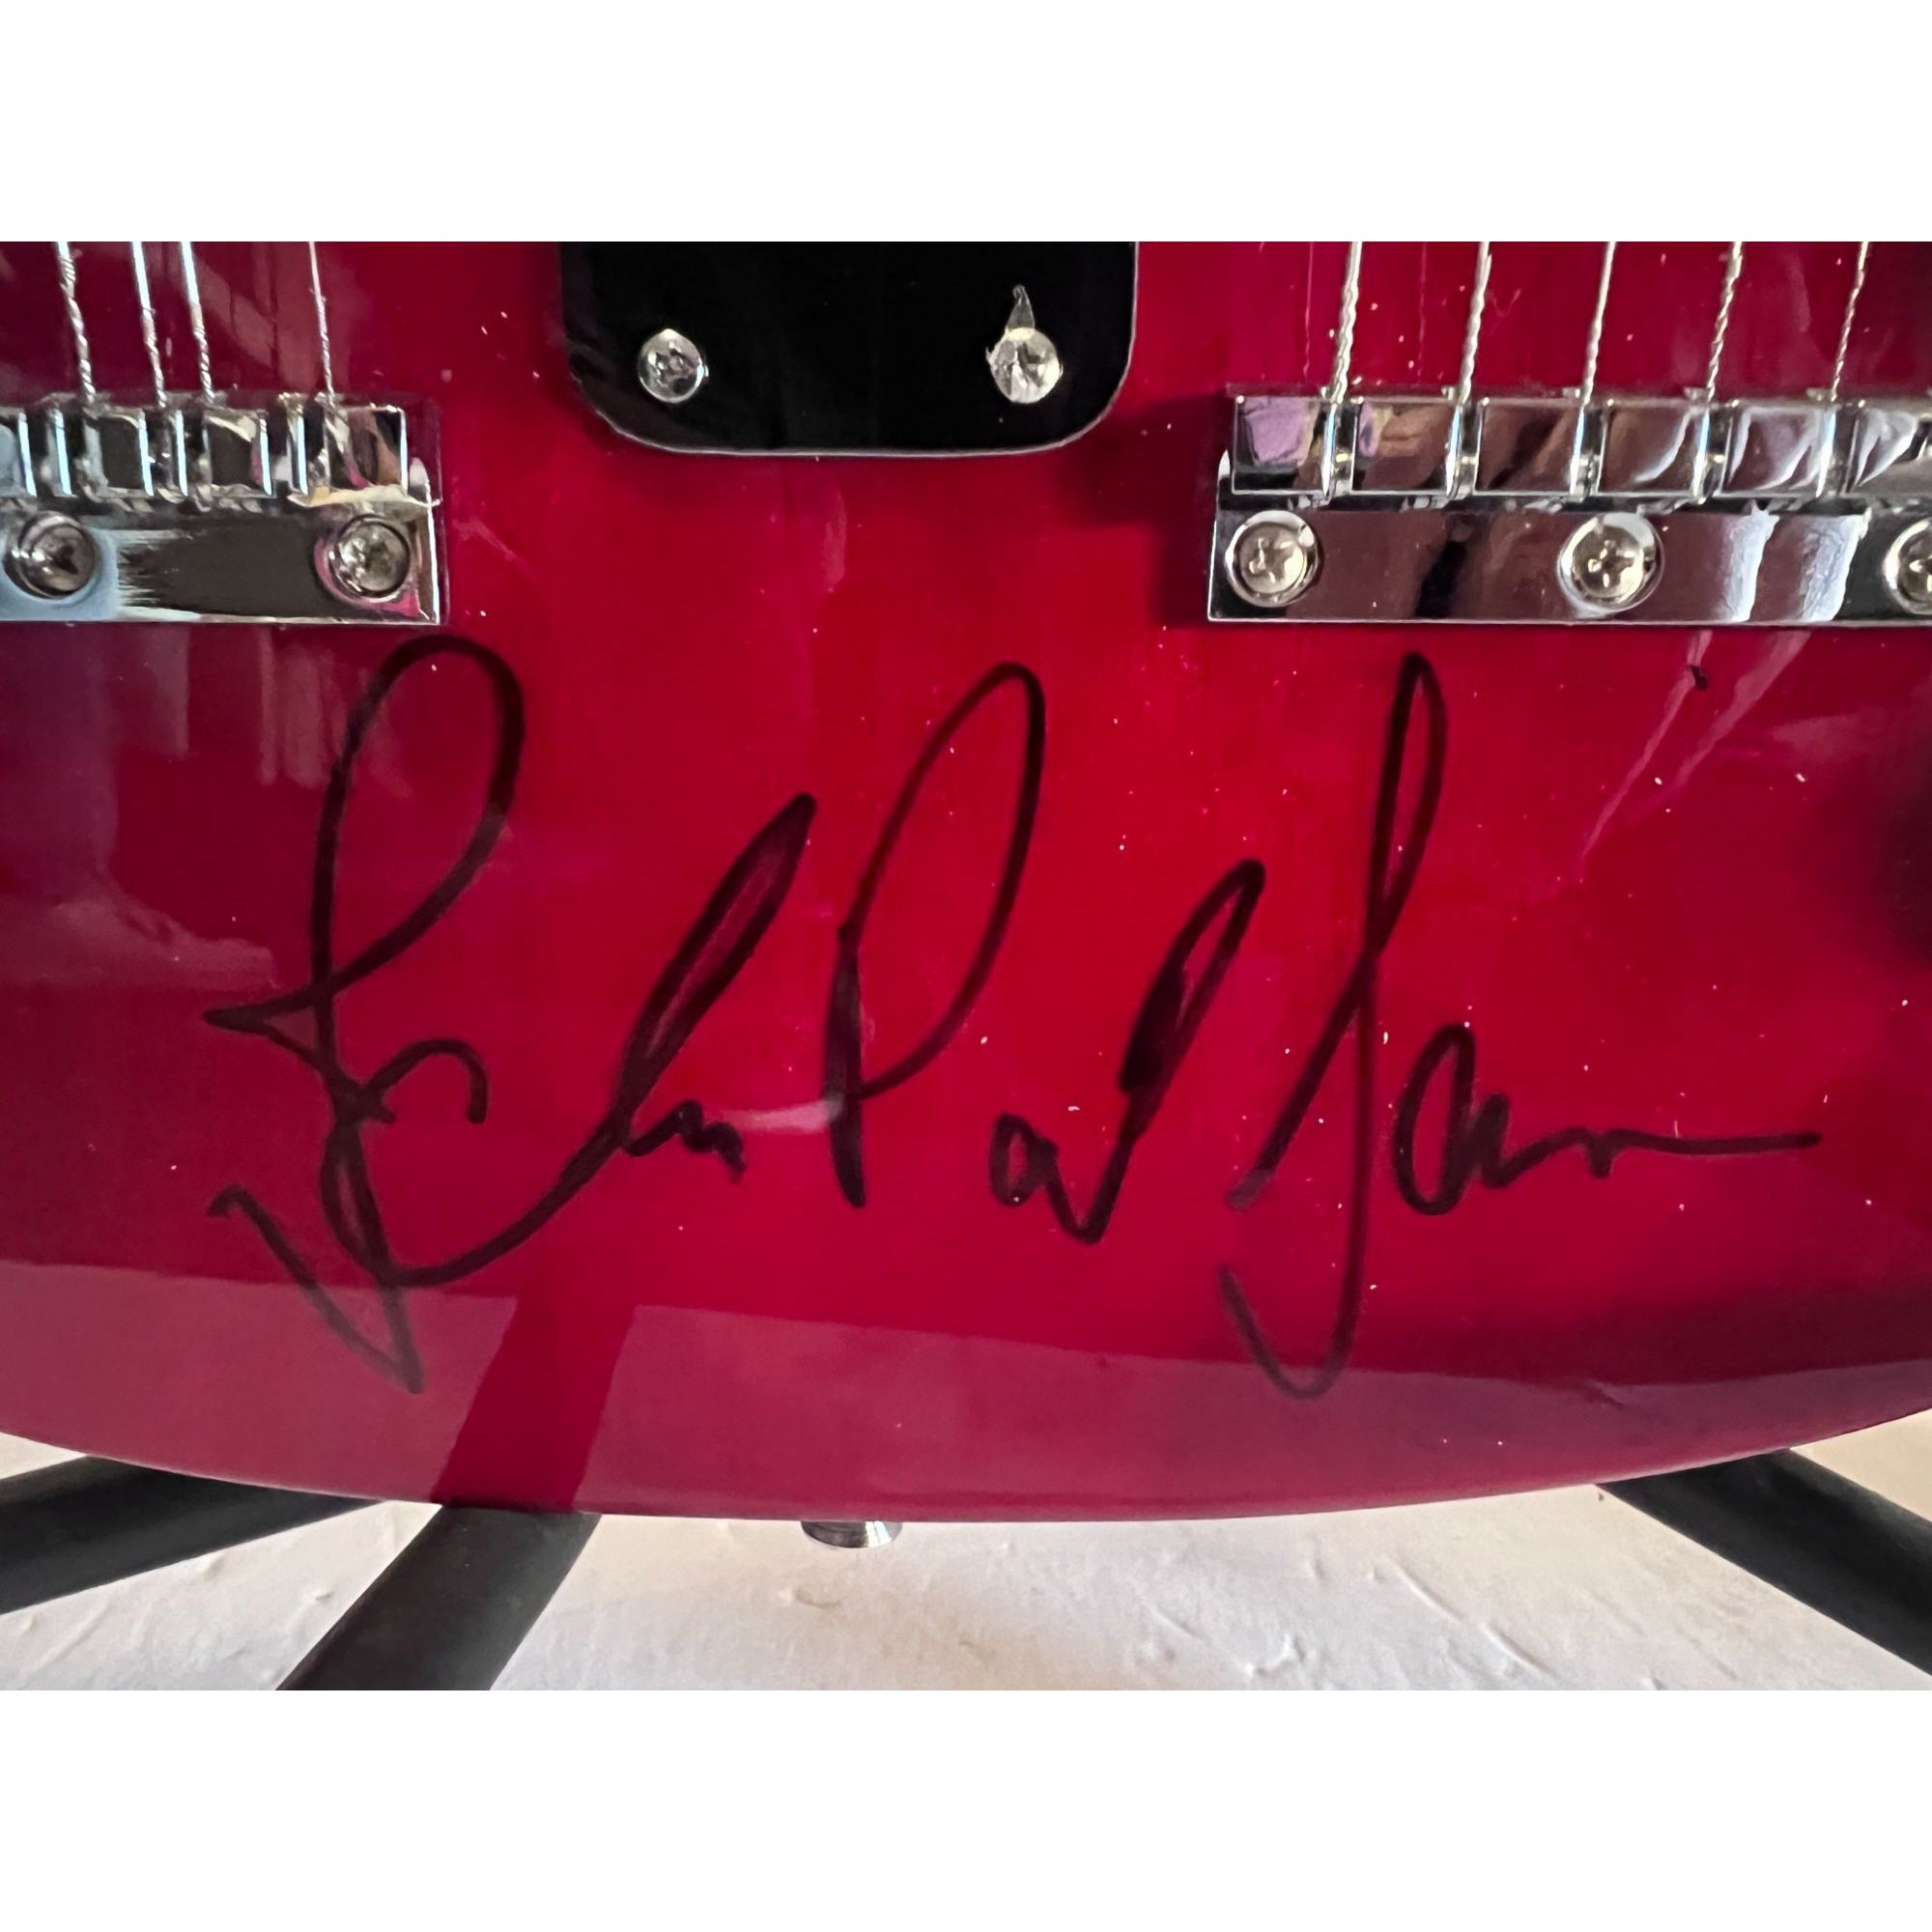 Jimmy Page, Robert Plant, John Paul Jones Led Zeppelin Les Paul style vintage electric guitar double neck signed with proof